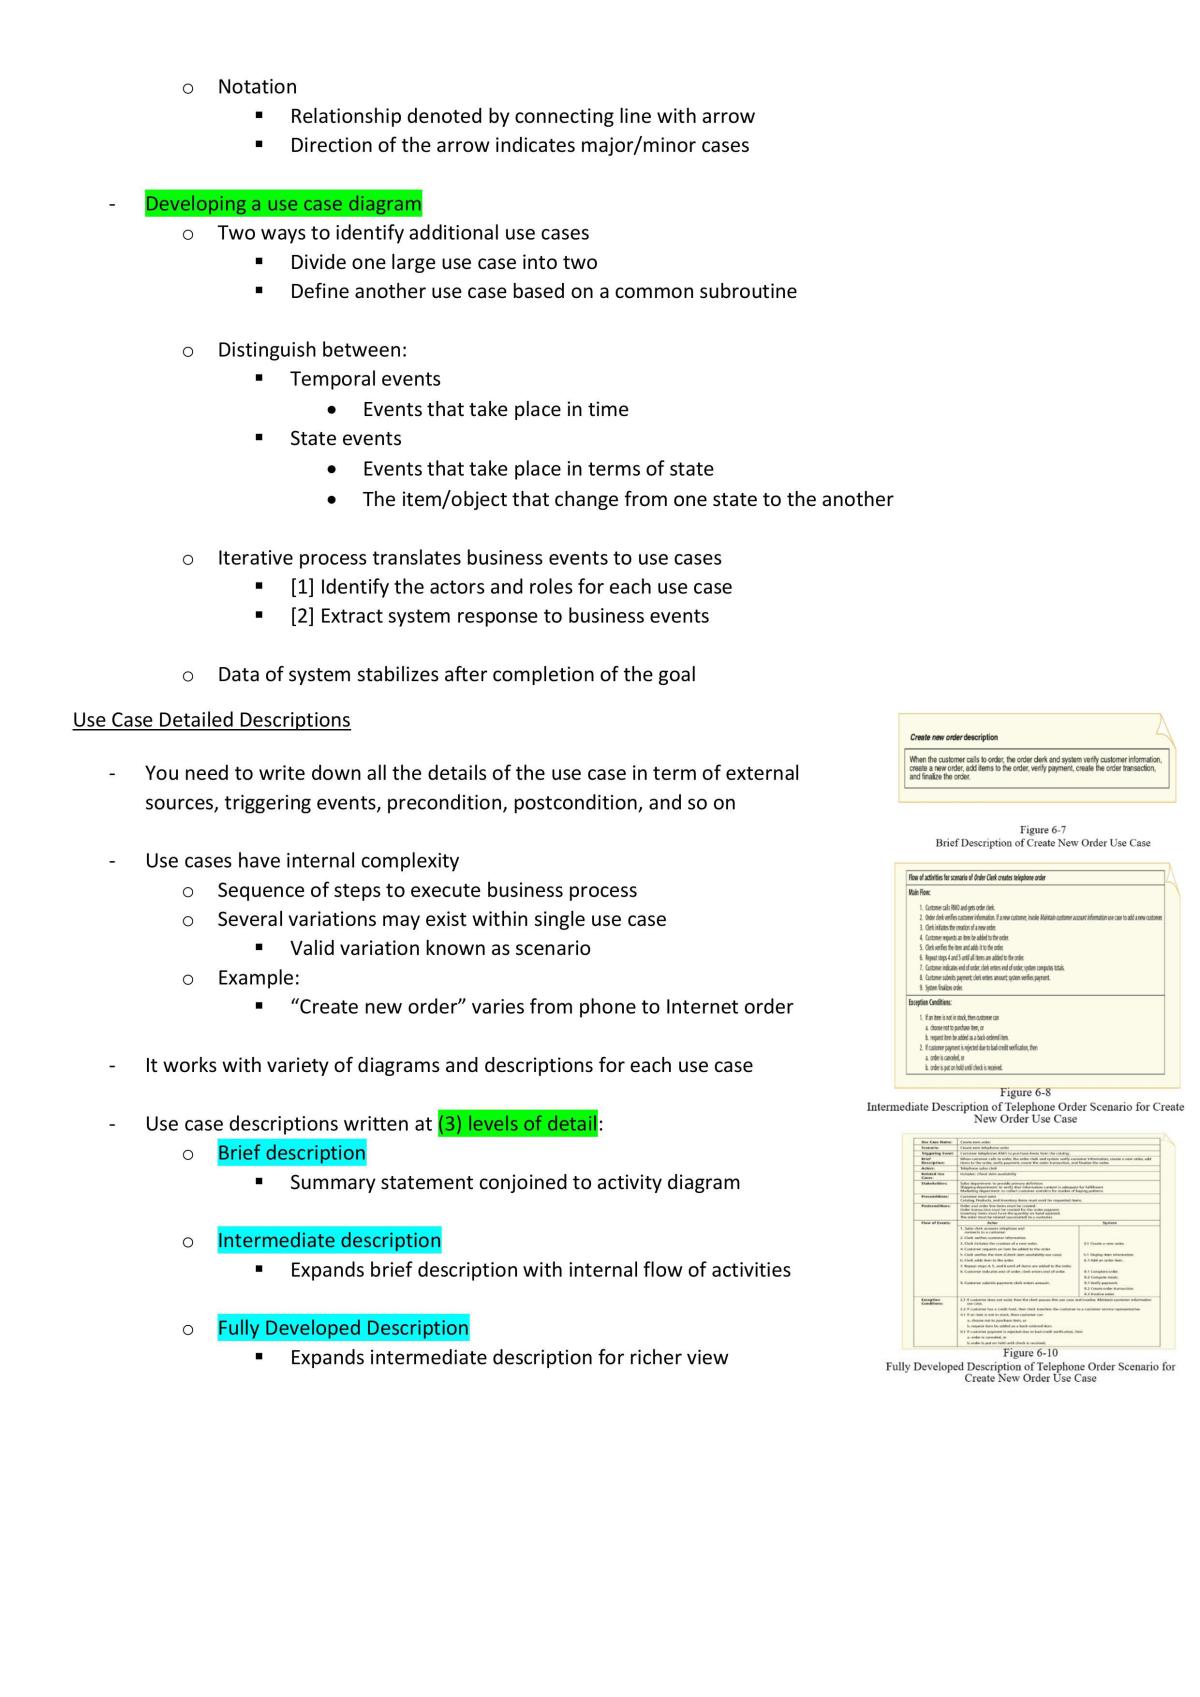 Object-Oriented Analysis and Design Note - Page 43